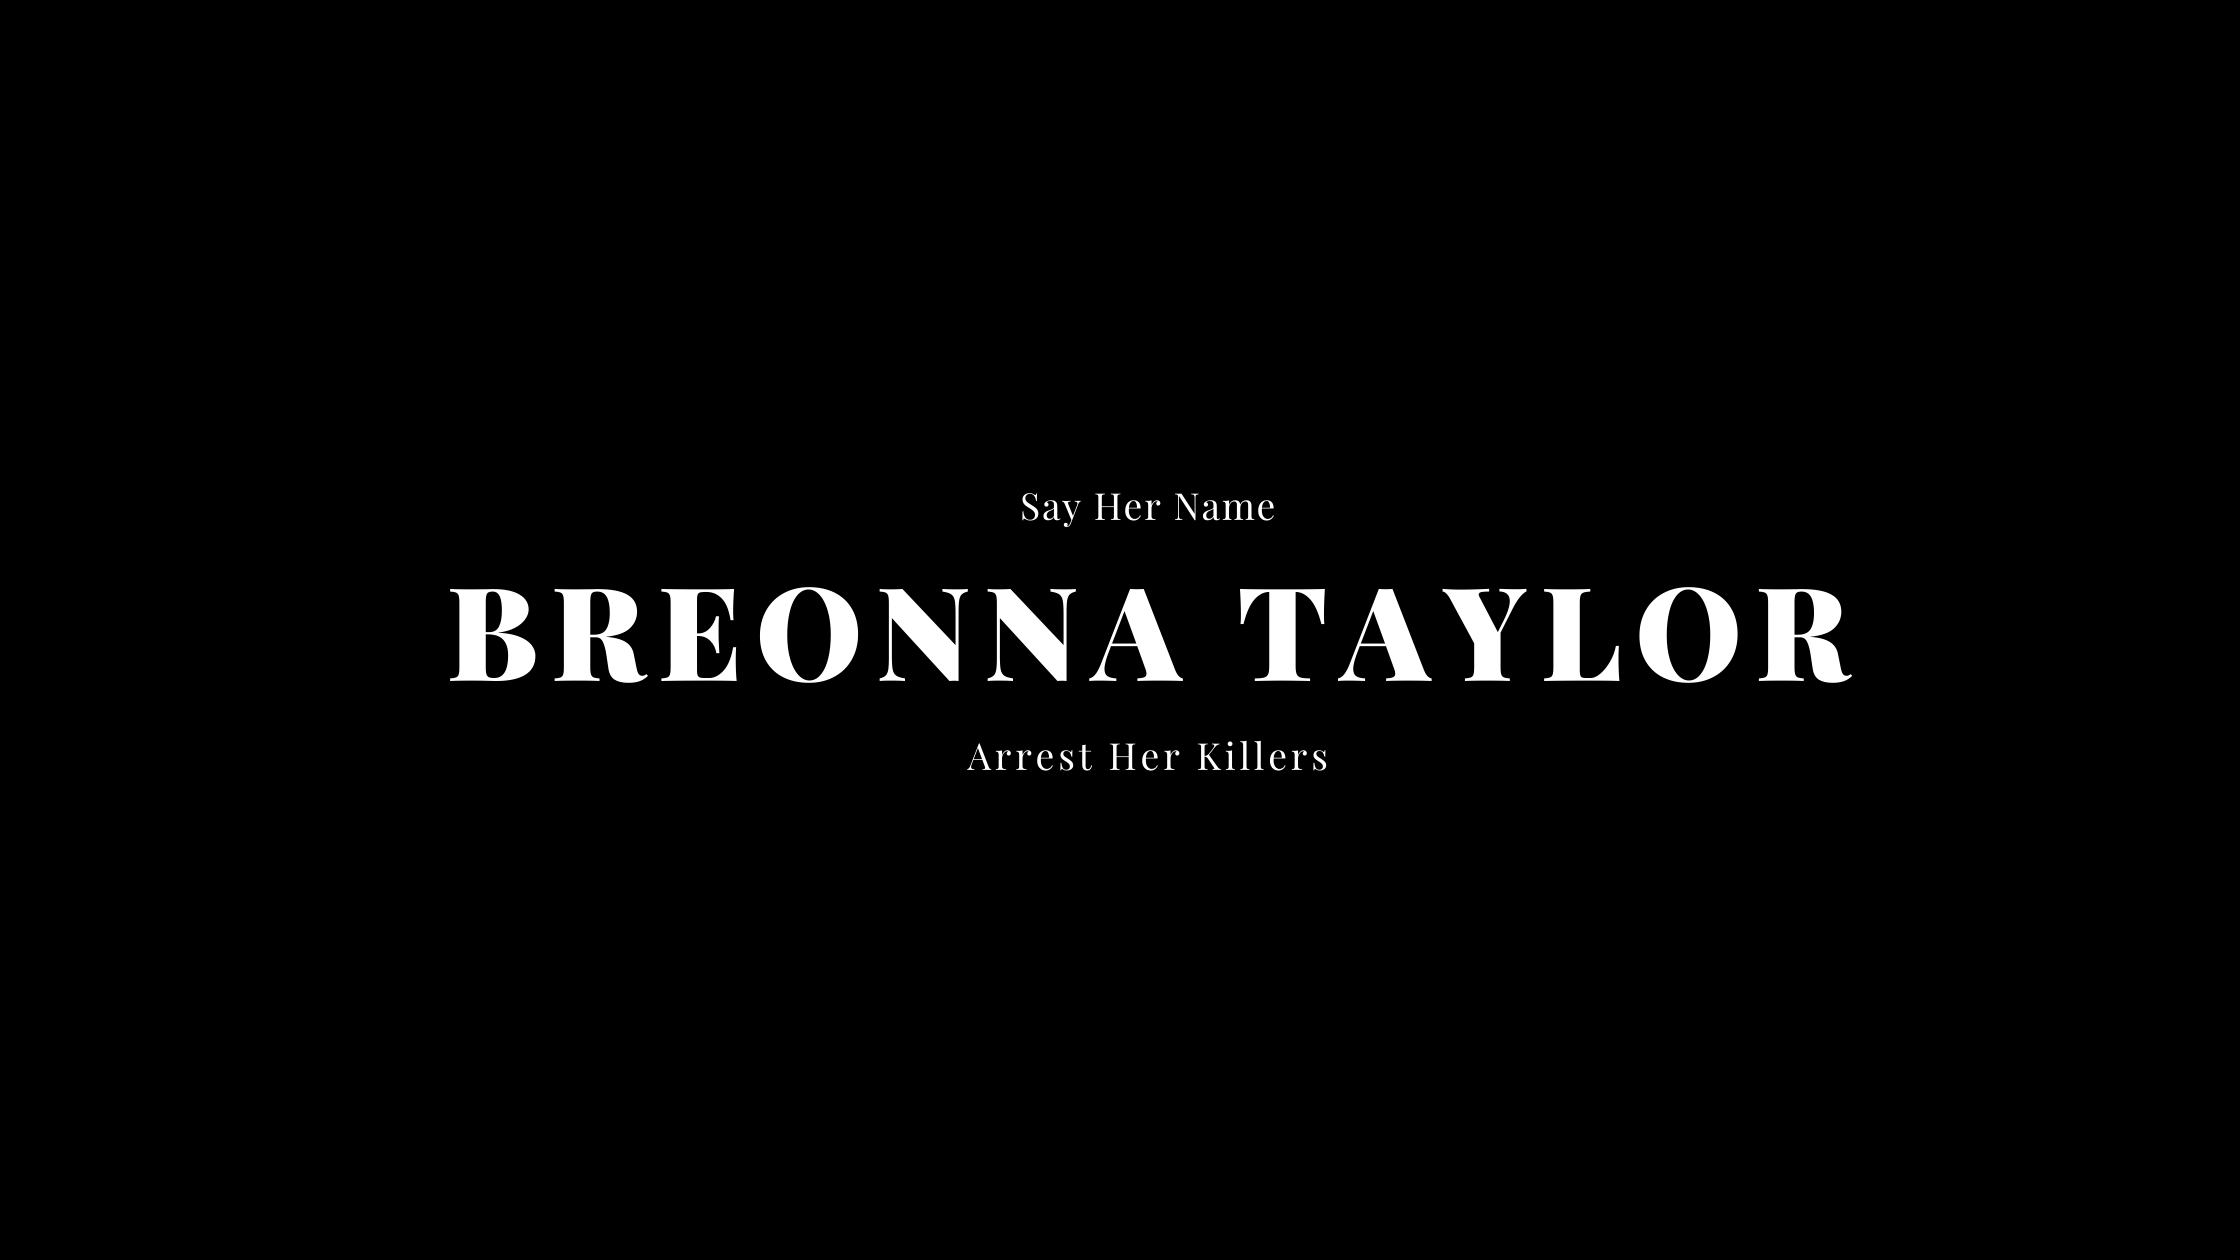 Breonna Taylor: How Her Story Illuminates the Experience of a Black Woman in America